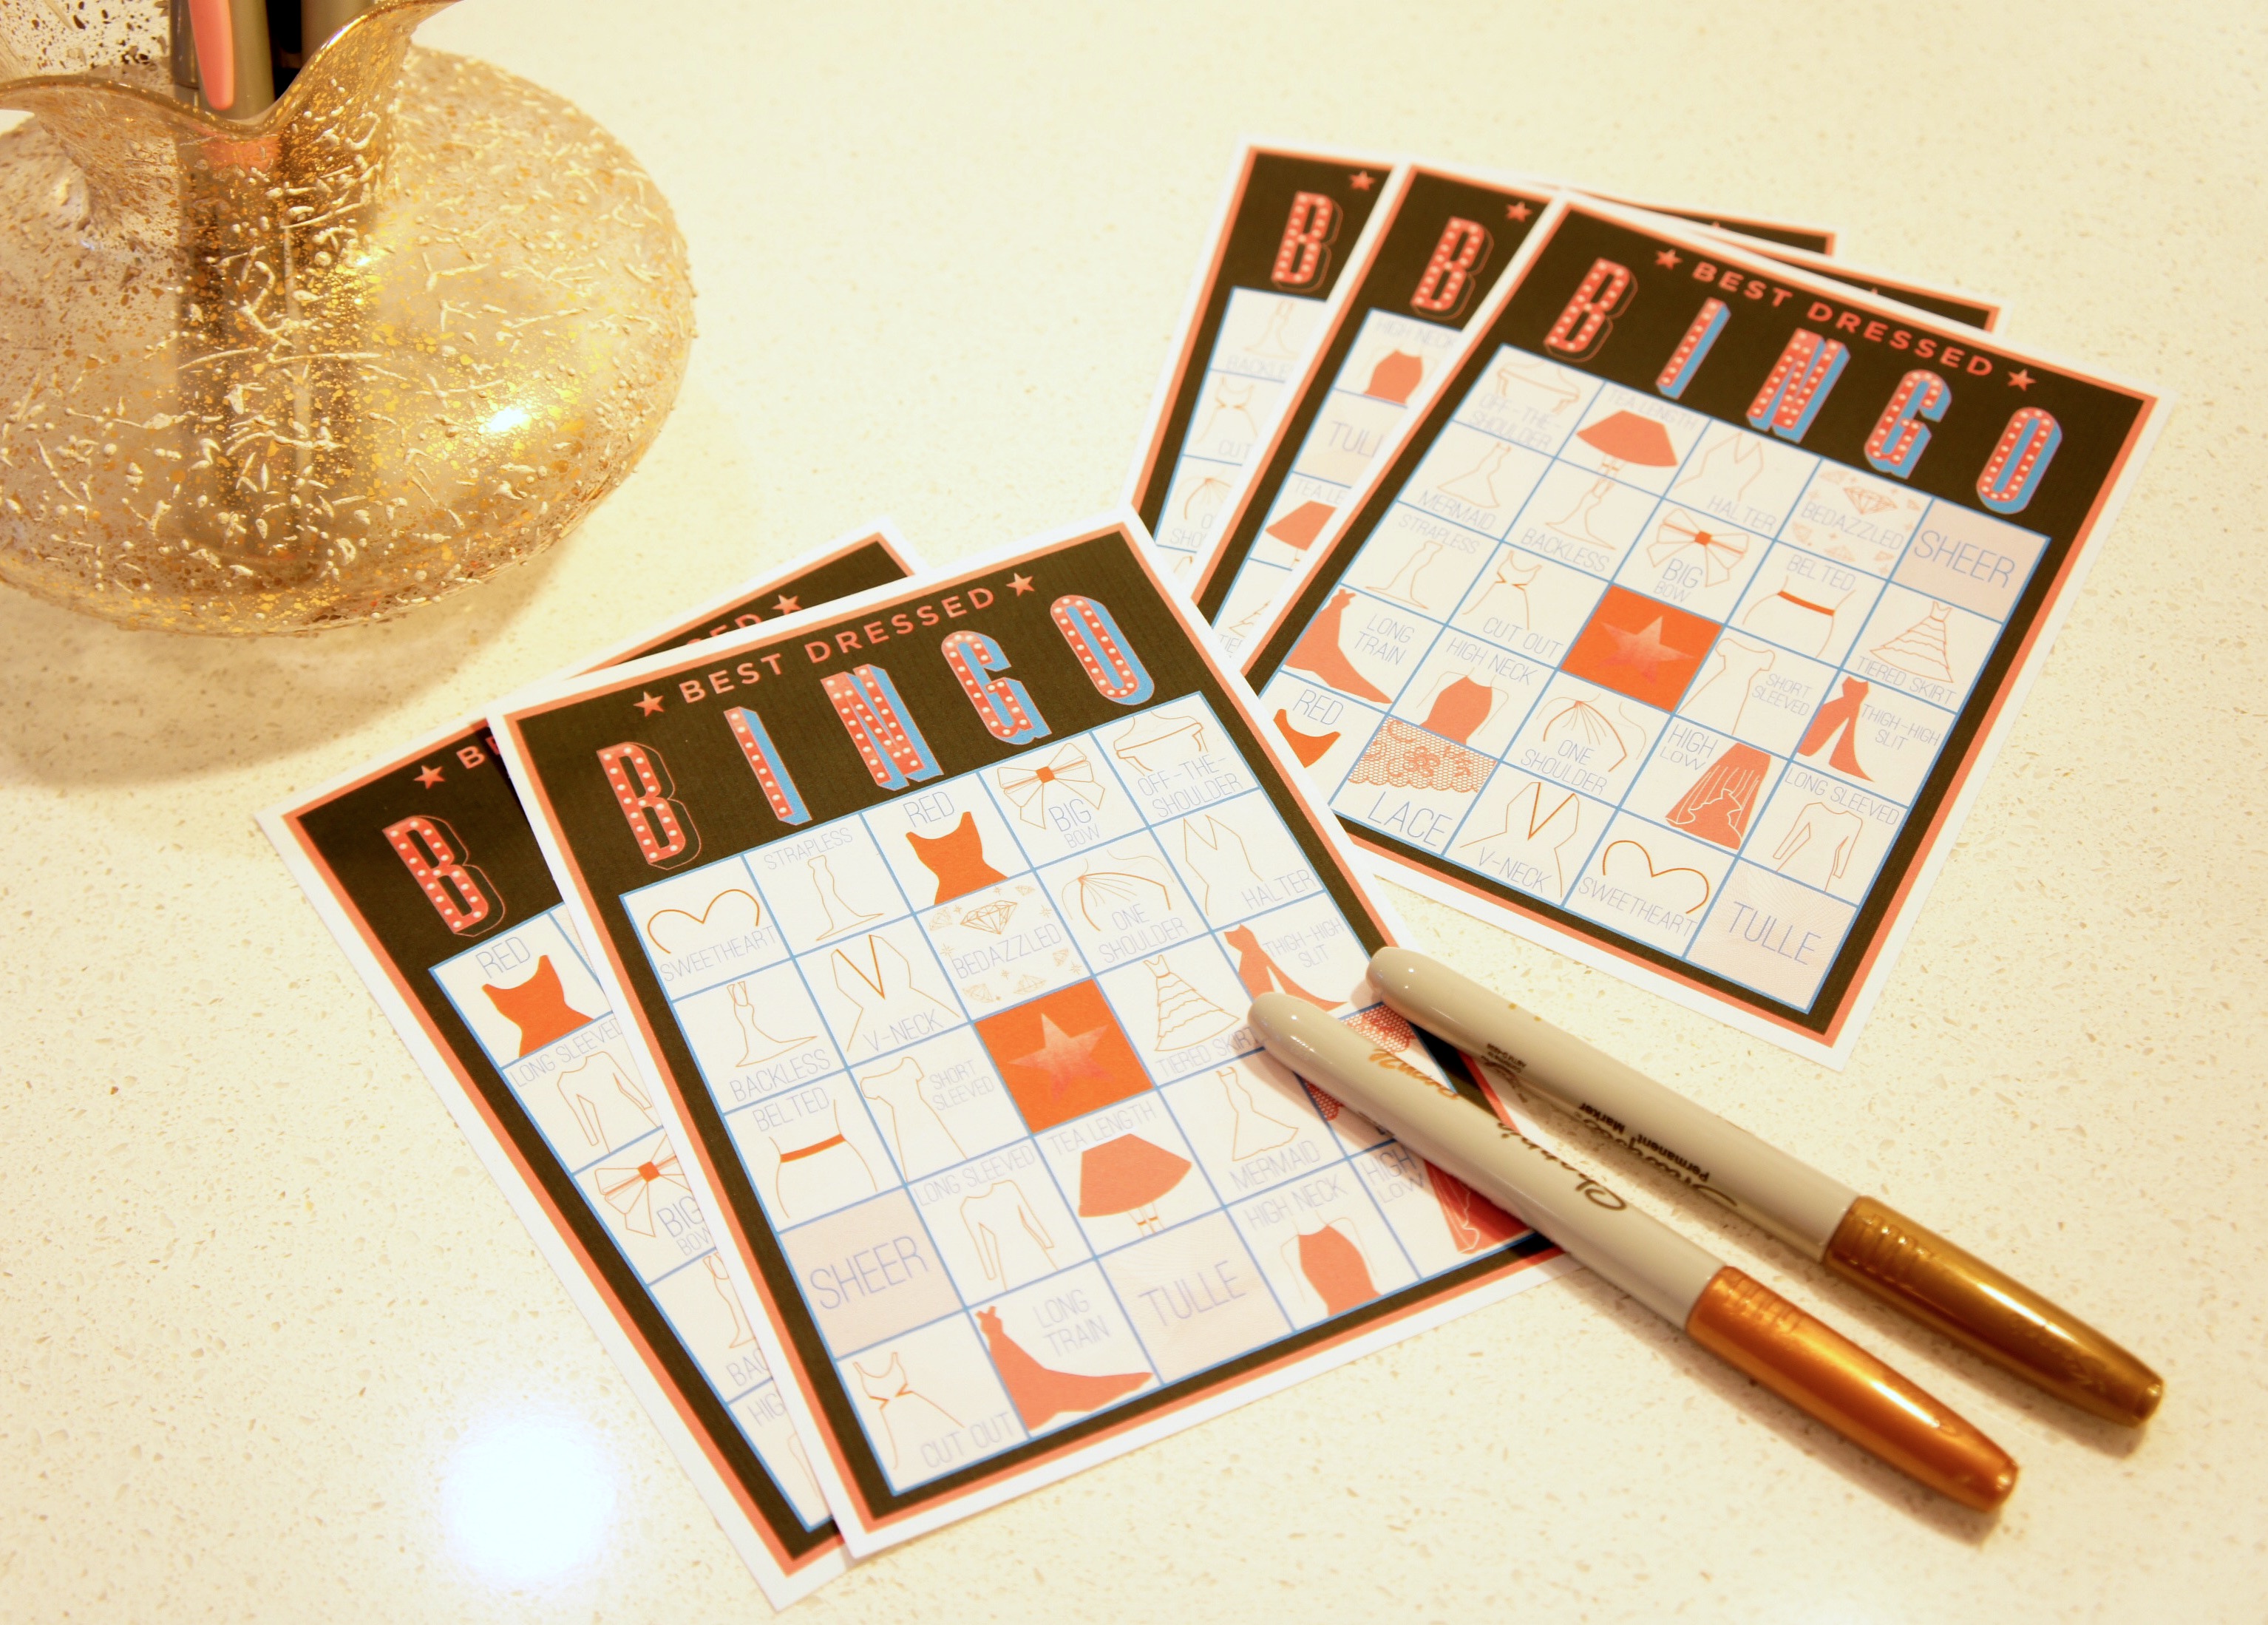 Bingo cards for an awards show party